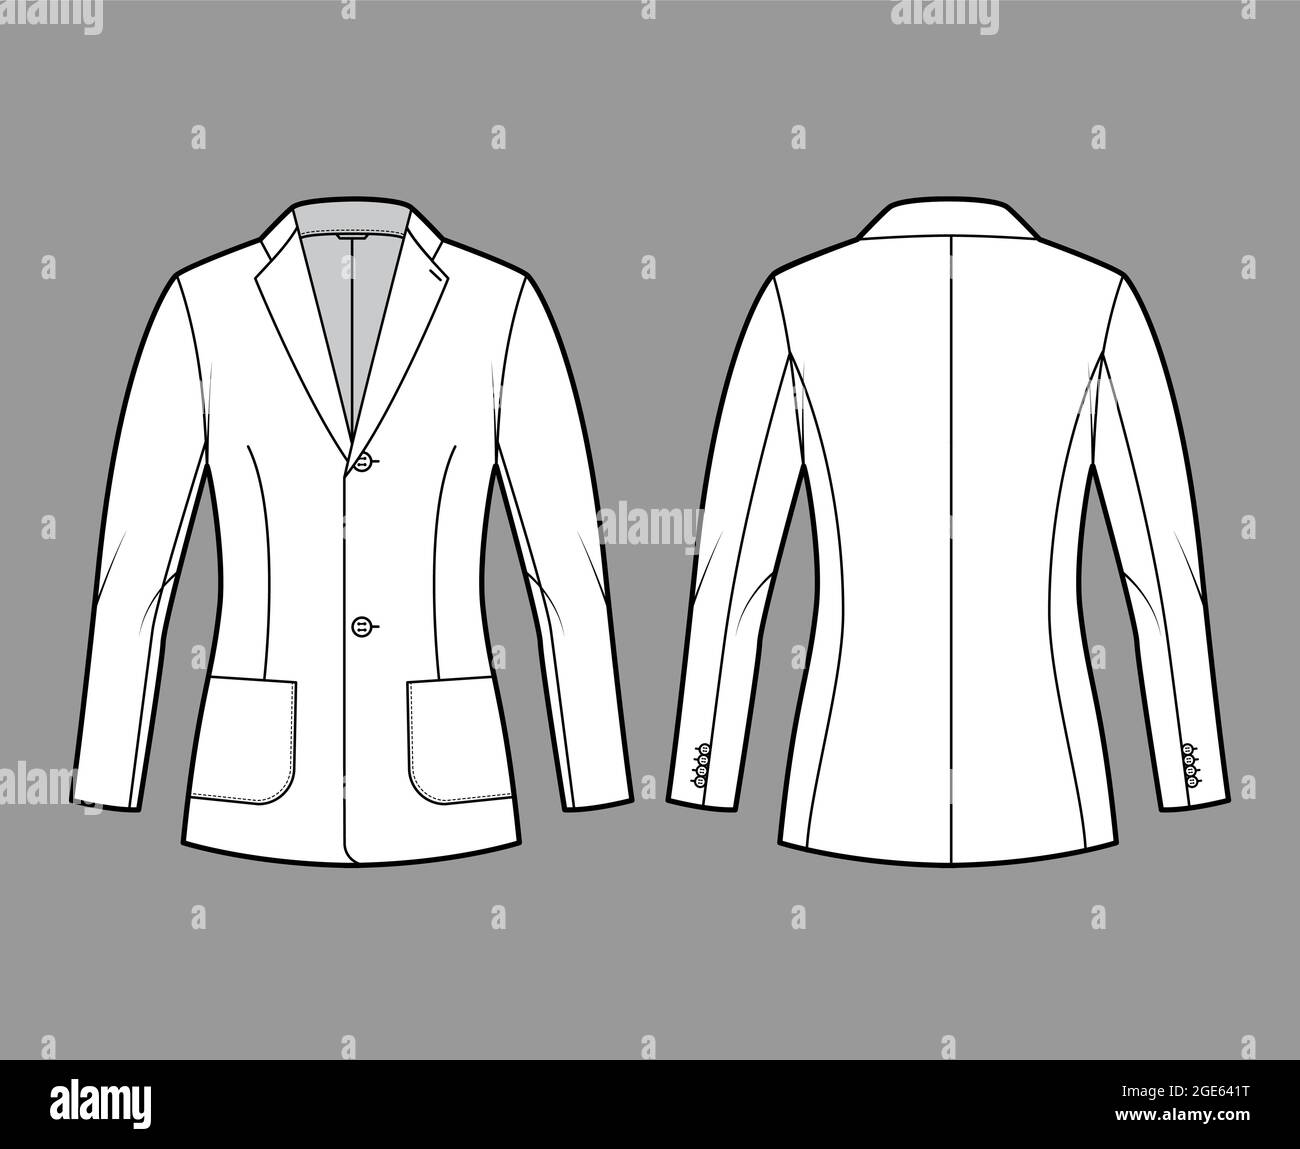 Blazer fitted jacket suit technical fashion illustration with single breasted, long sleeves, notched lapel collar, patch pockets, hip length. Flat coat front, back, white color. Women, men CAD mockup Stock Vector